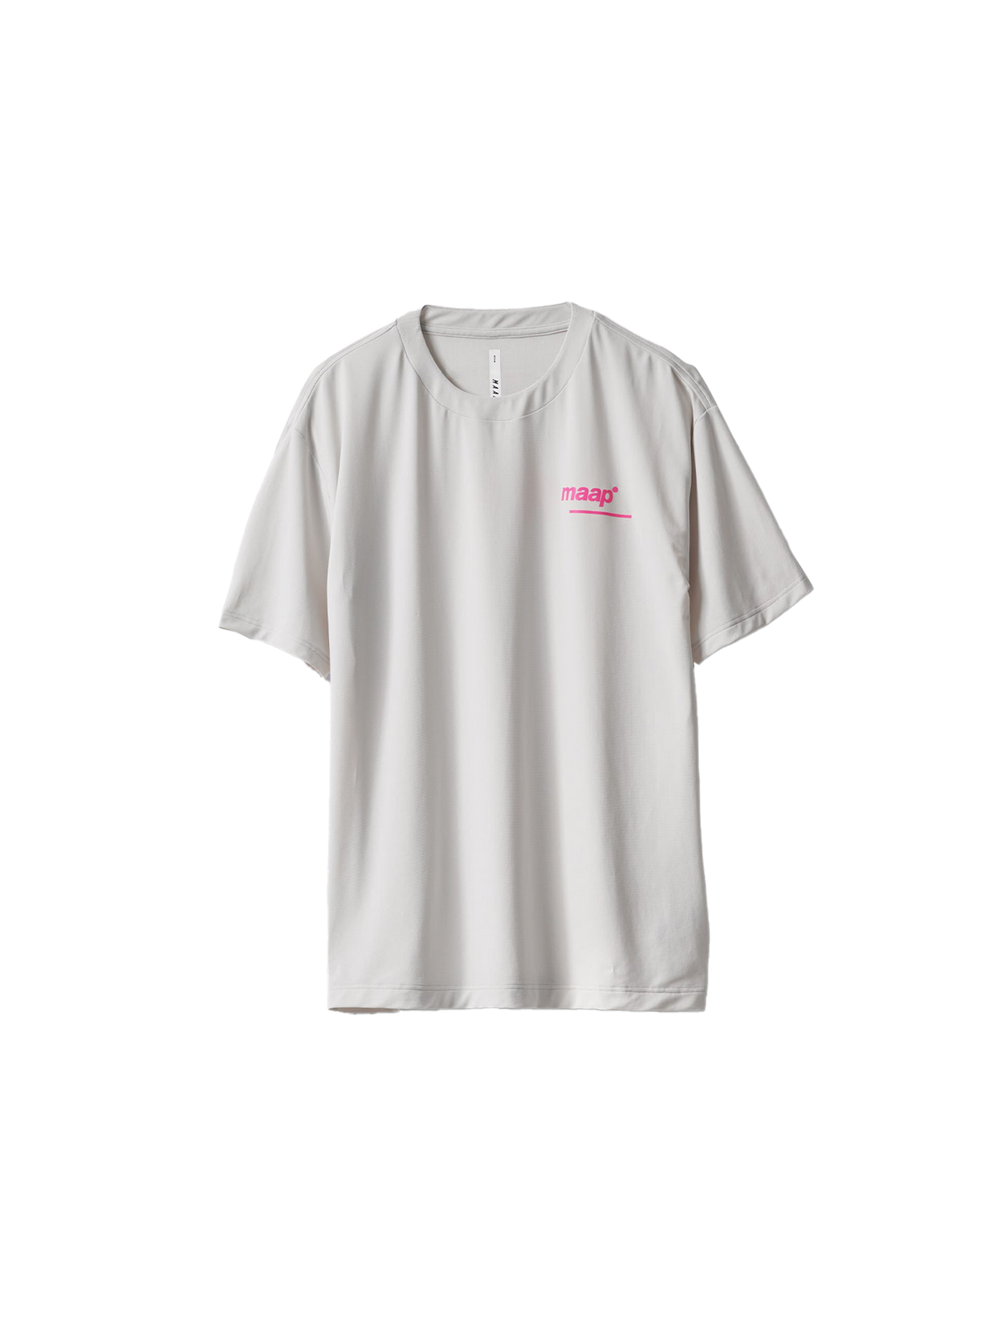 Product Image for Training Tee